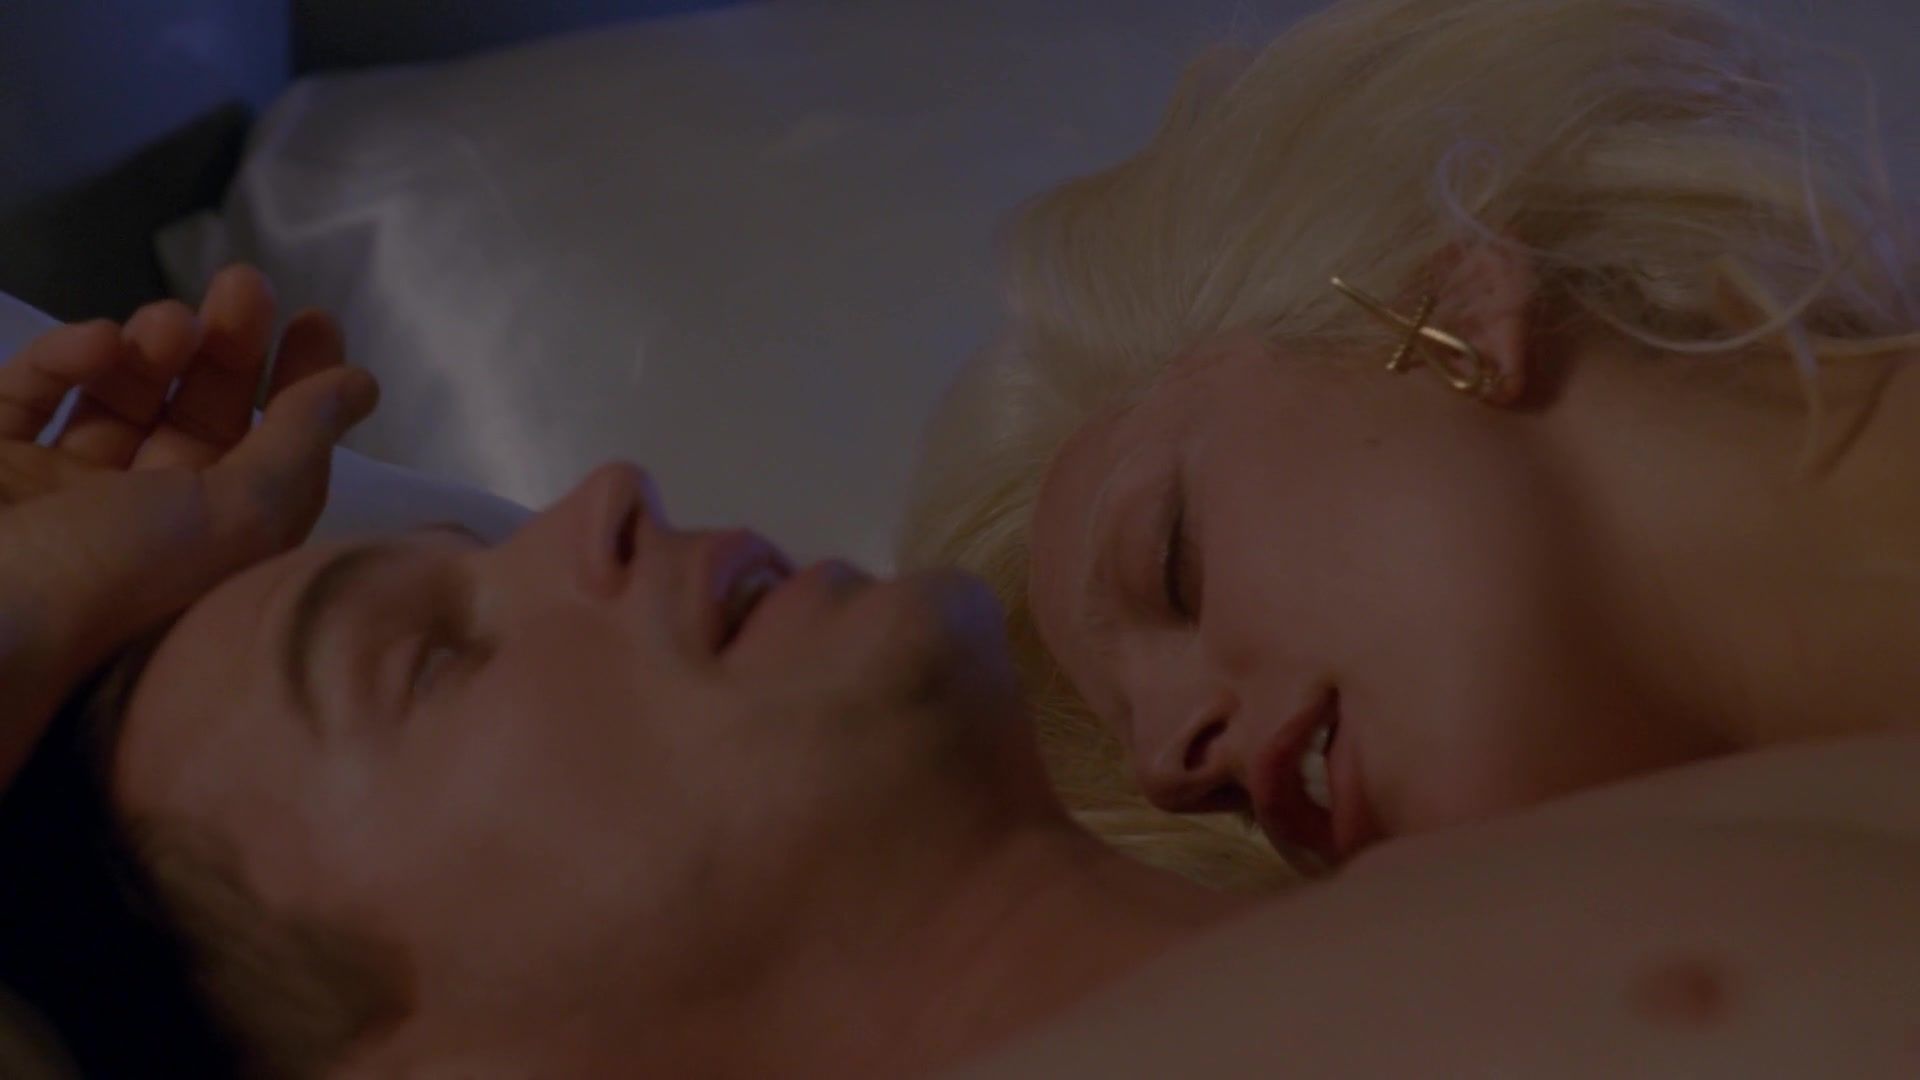 3some Naked Lady Gaga nude in American Horror Story S5 E9 Erotica - 1